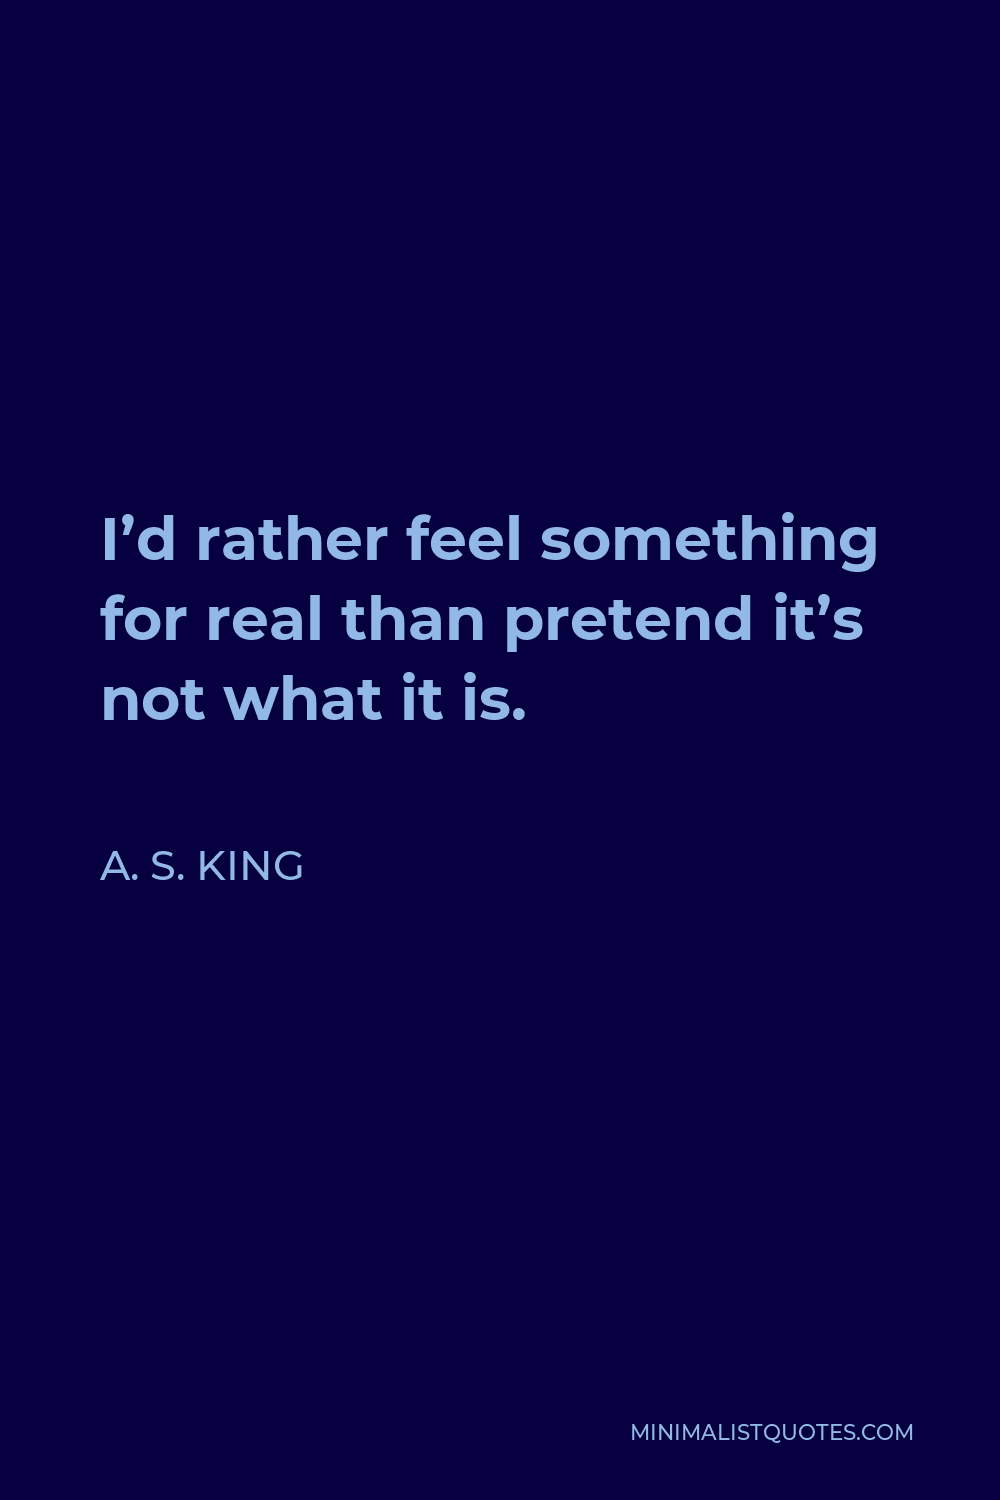 A. S. King Quote - I’d rather feel something for real than pretend it’s not what it is.